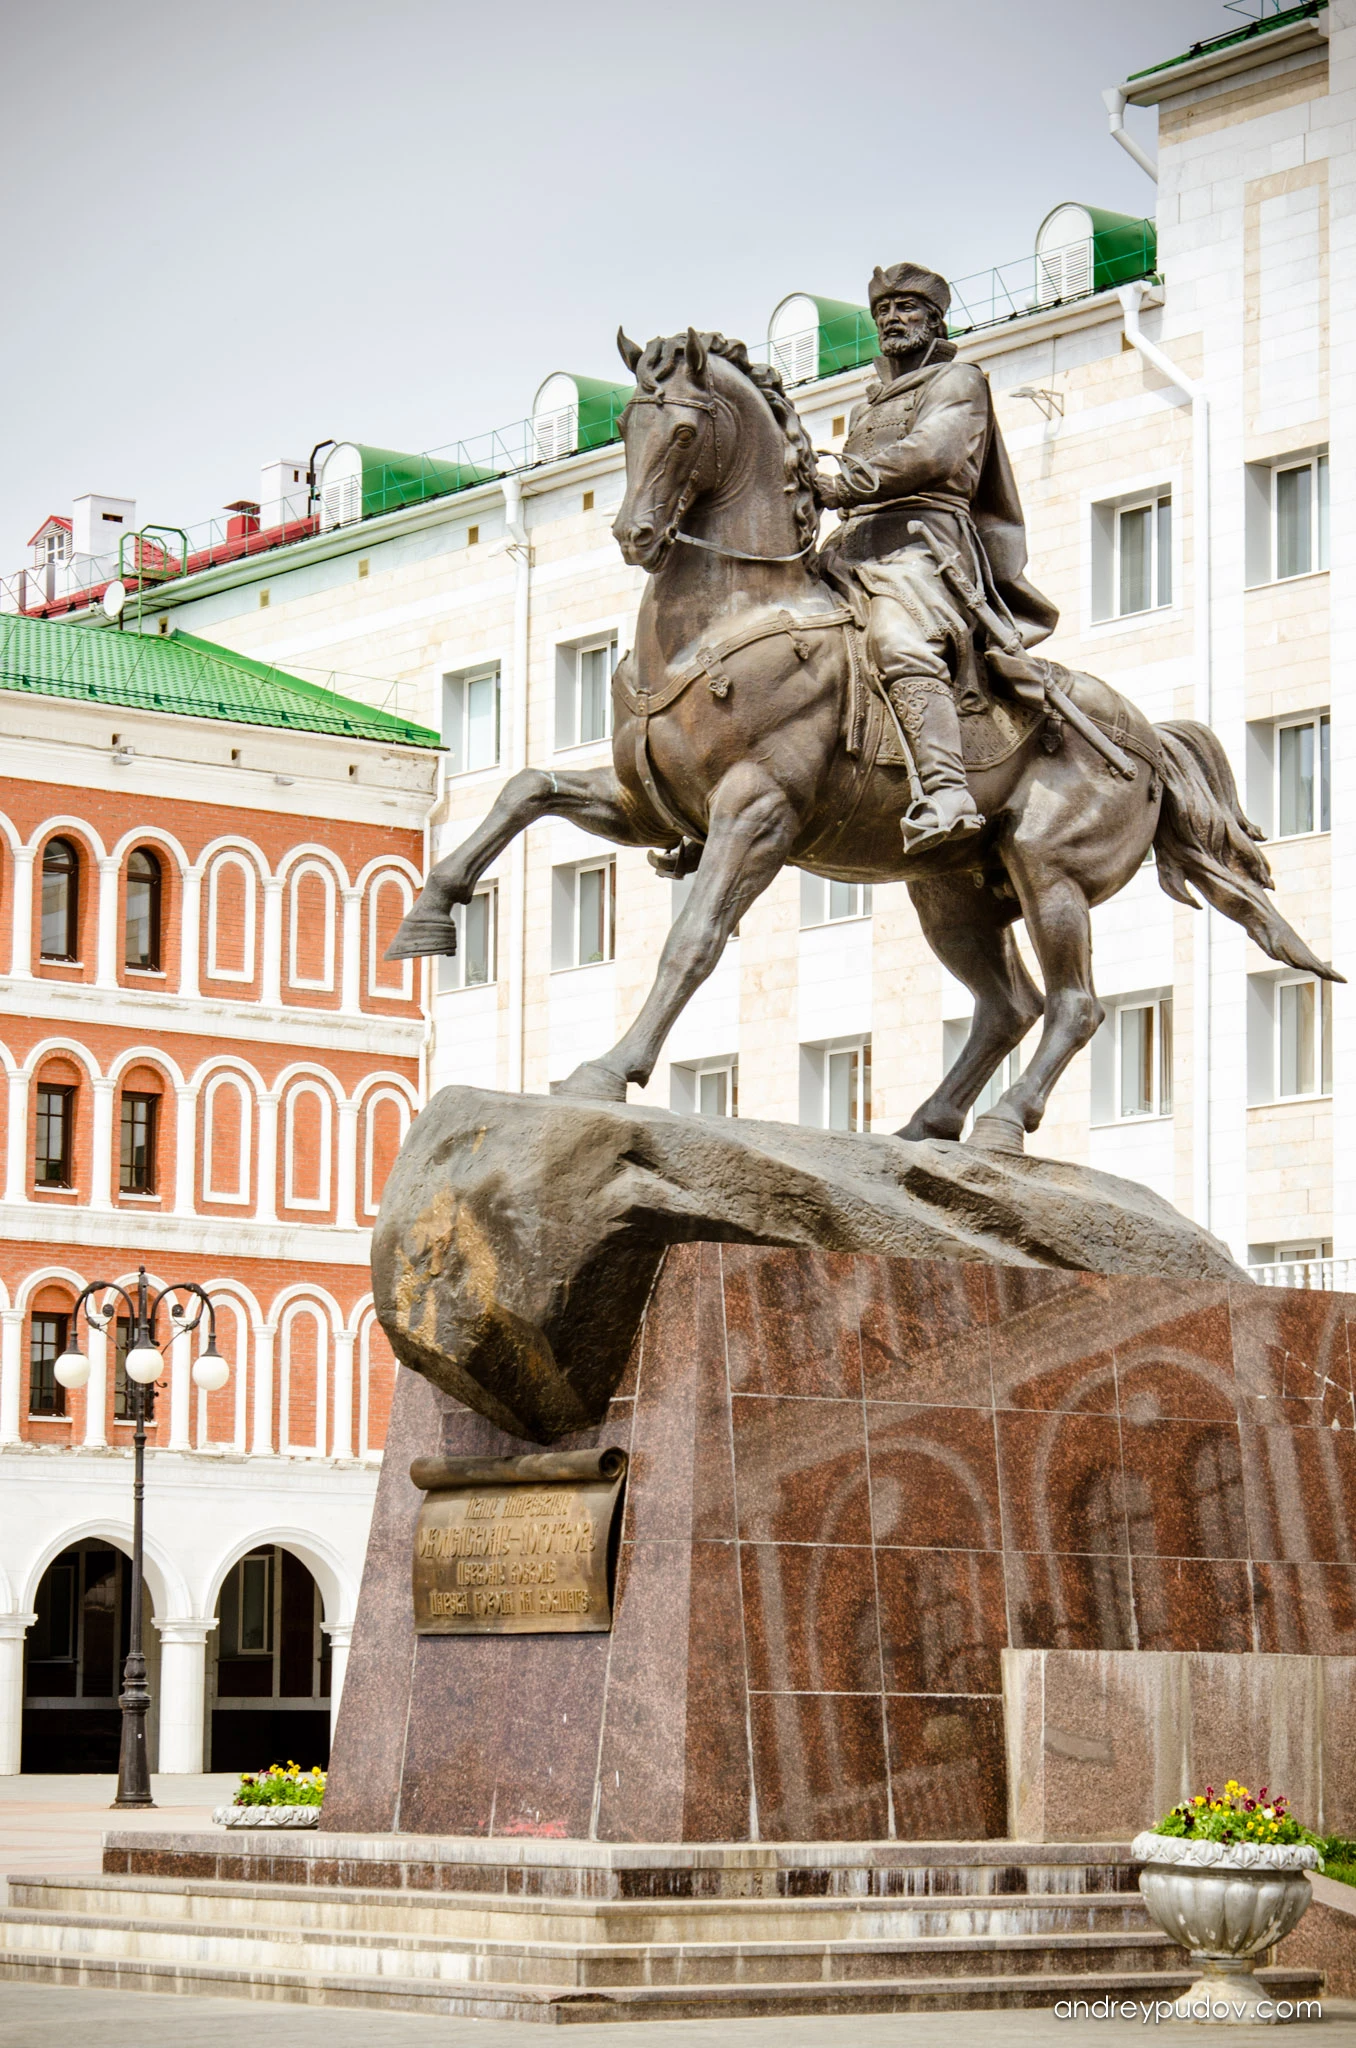 Monument to Prince Ivan Obolensky-Nogotkov, the founder of the city and the first governor of Tsarevokokshaisk (which literally means - the Tsar's town on Kokshaga River). Ivan Andreevich had a close relationship with the royal court, took an active part in the military and political life of the country. Participated in the suppression of the uprising of the meadow and mountain Mari. The monument was made in 2007 by the Moscow sculptor Andrey Kovalchuk.